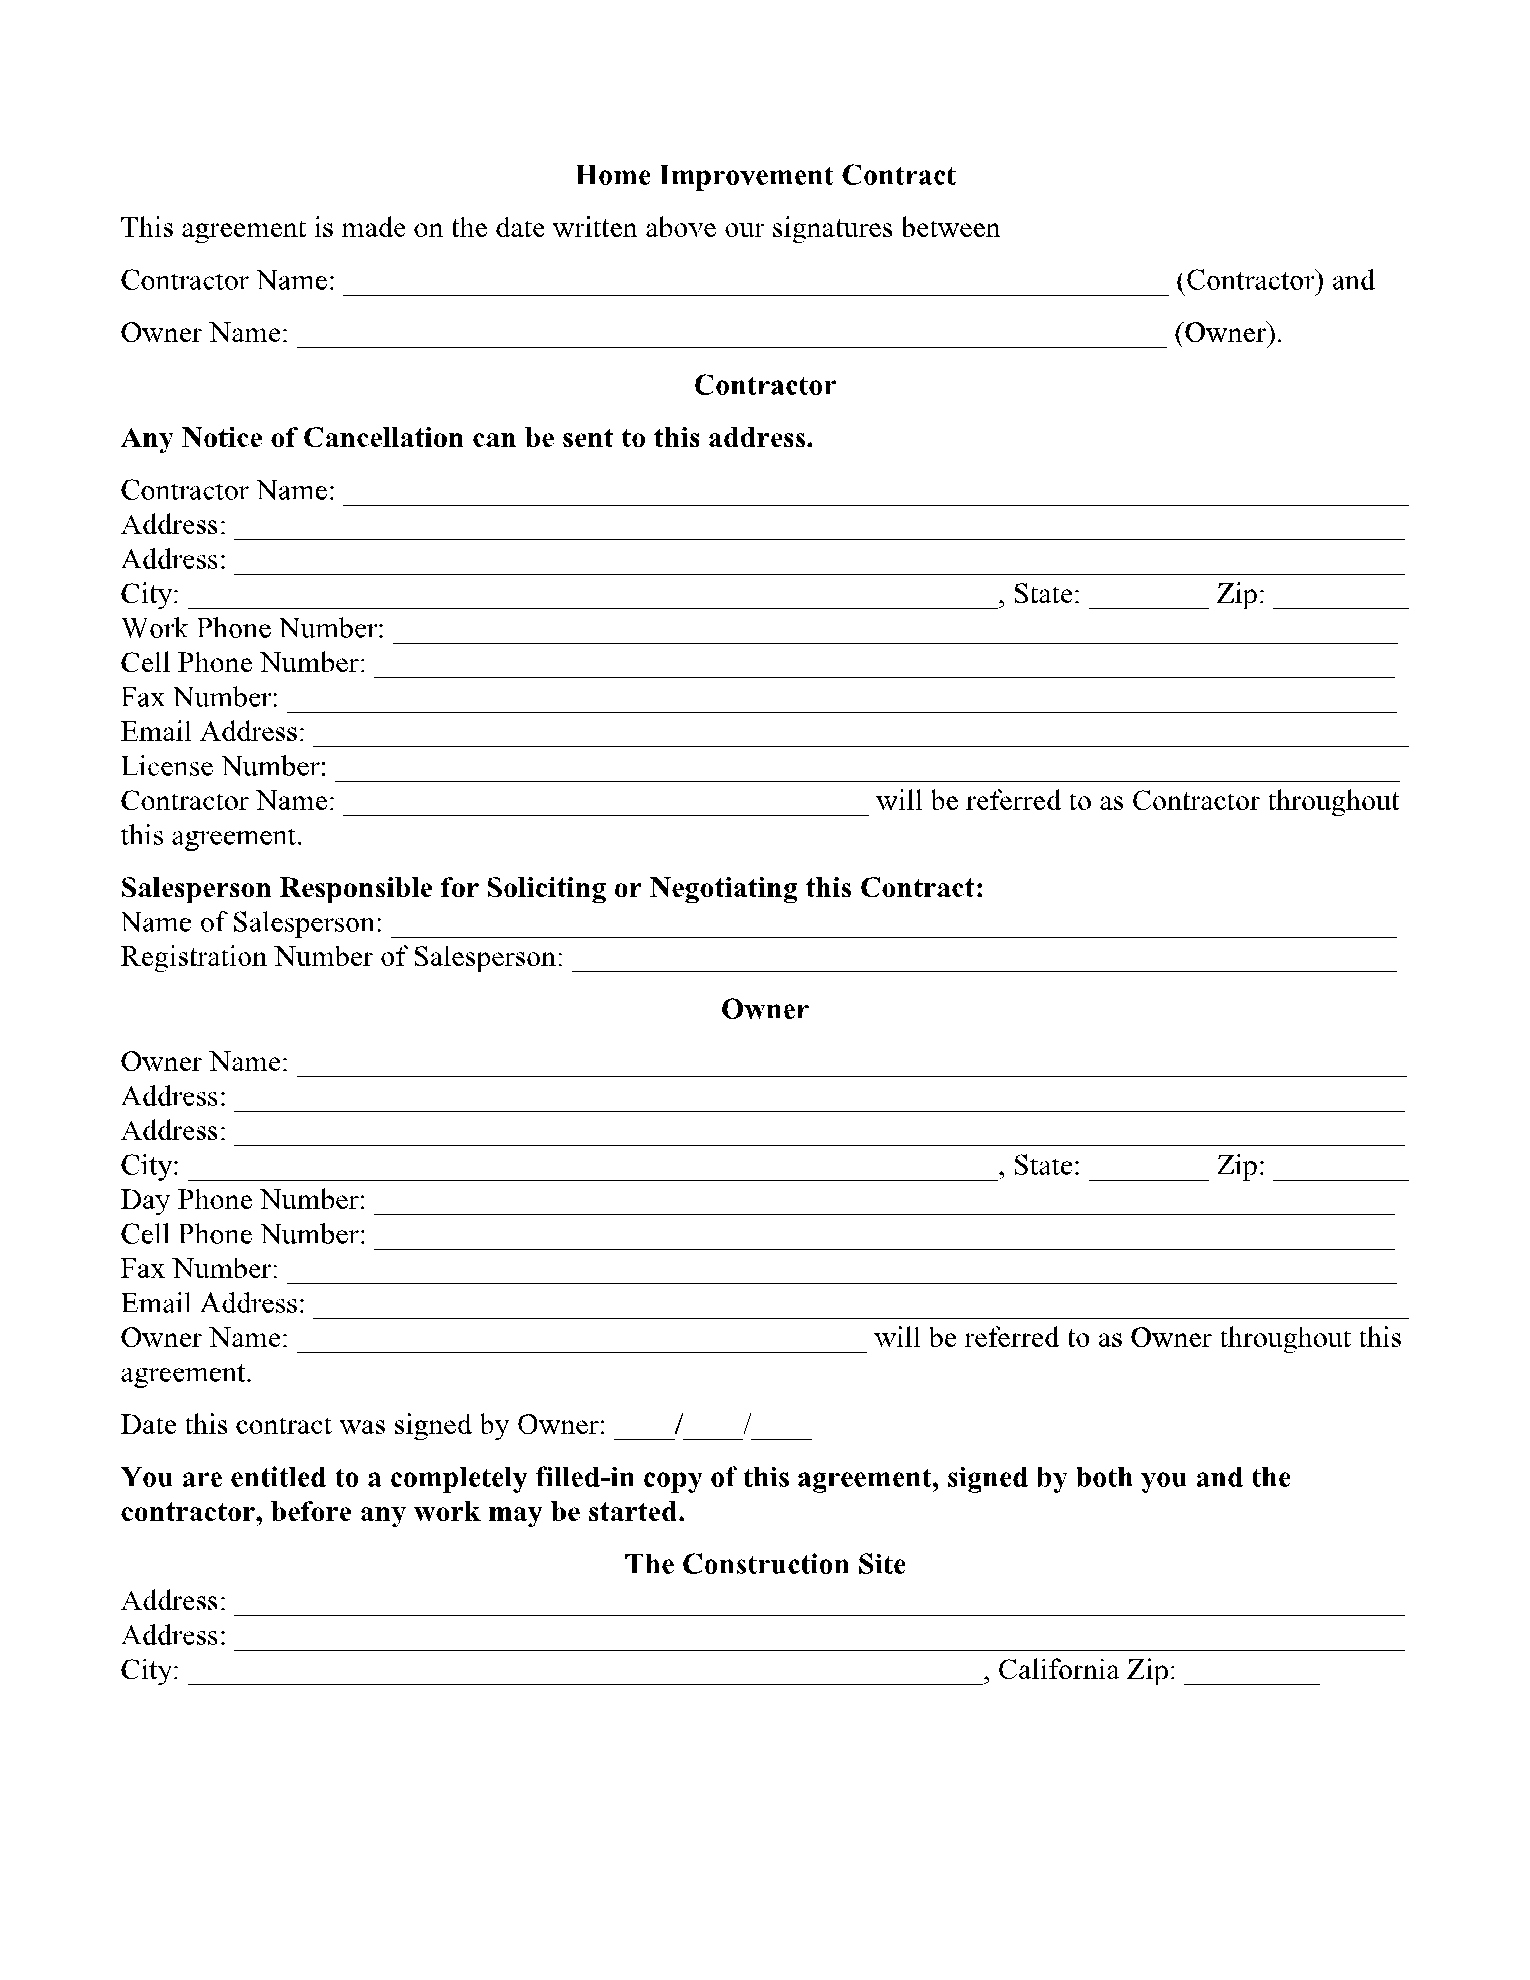 Home Improvement Contract Template: Free Sample (2021) with Free Printable Home Improvement Contracts